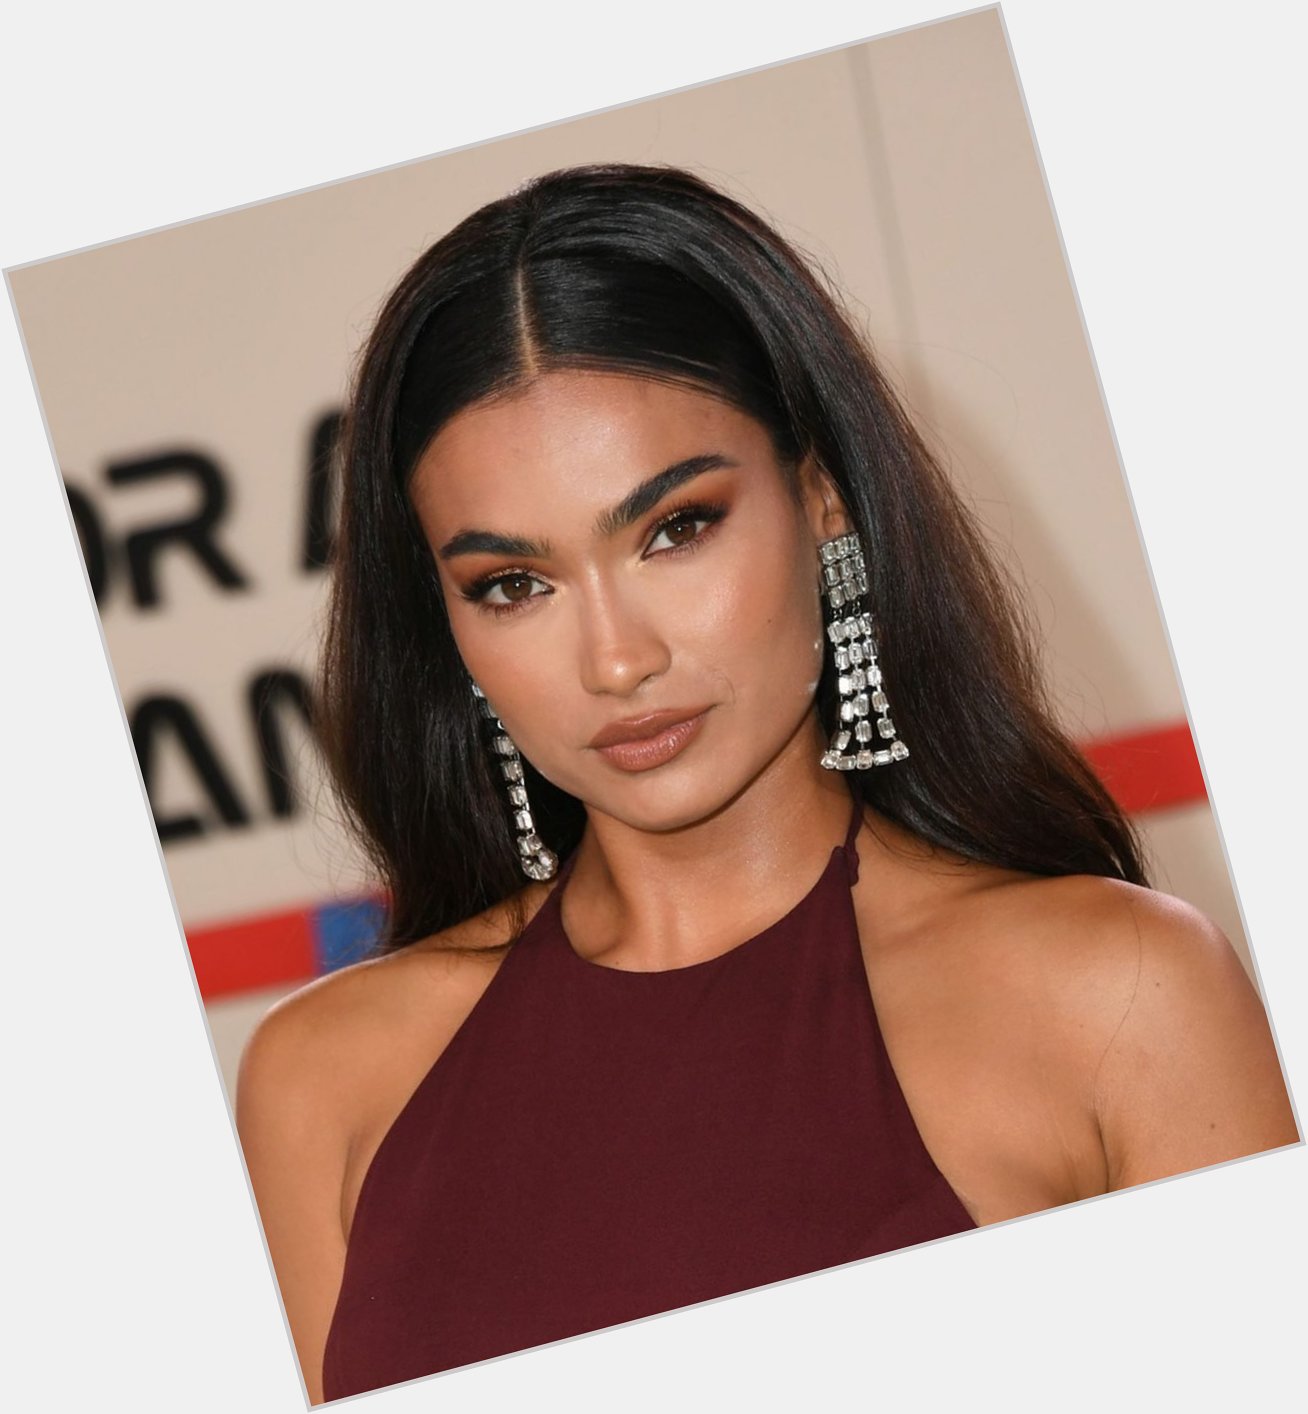 <a href="/hot-women/kelly-gale/where-dating-news-photos">Kelly Gale</a> Slim body,  dark brown hair & hairstyles